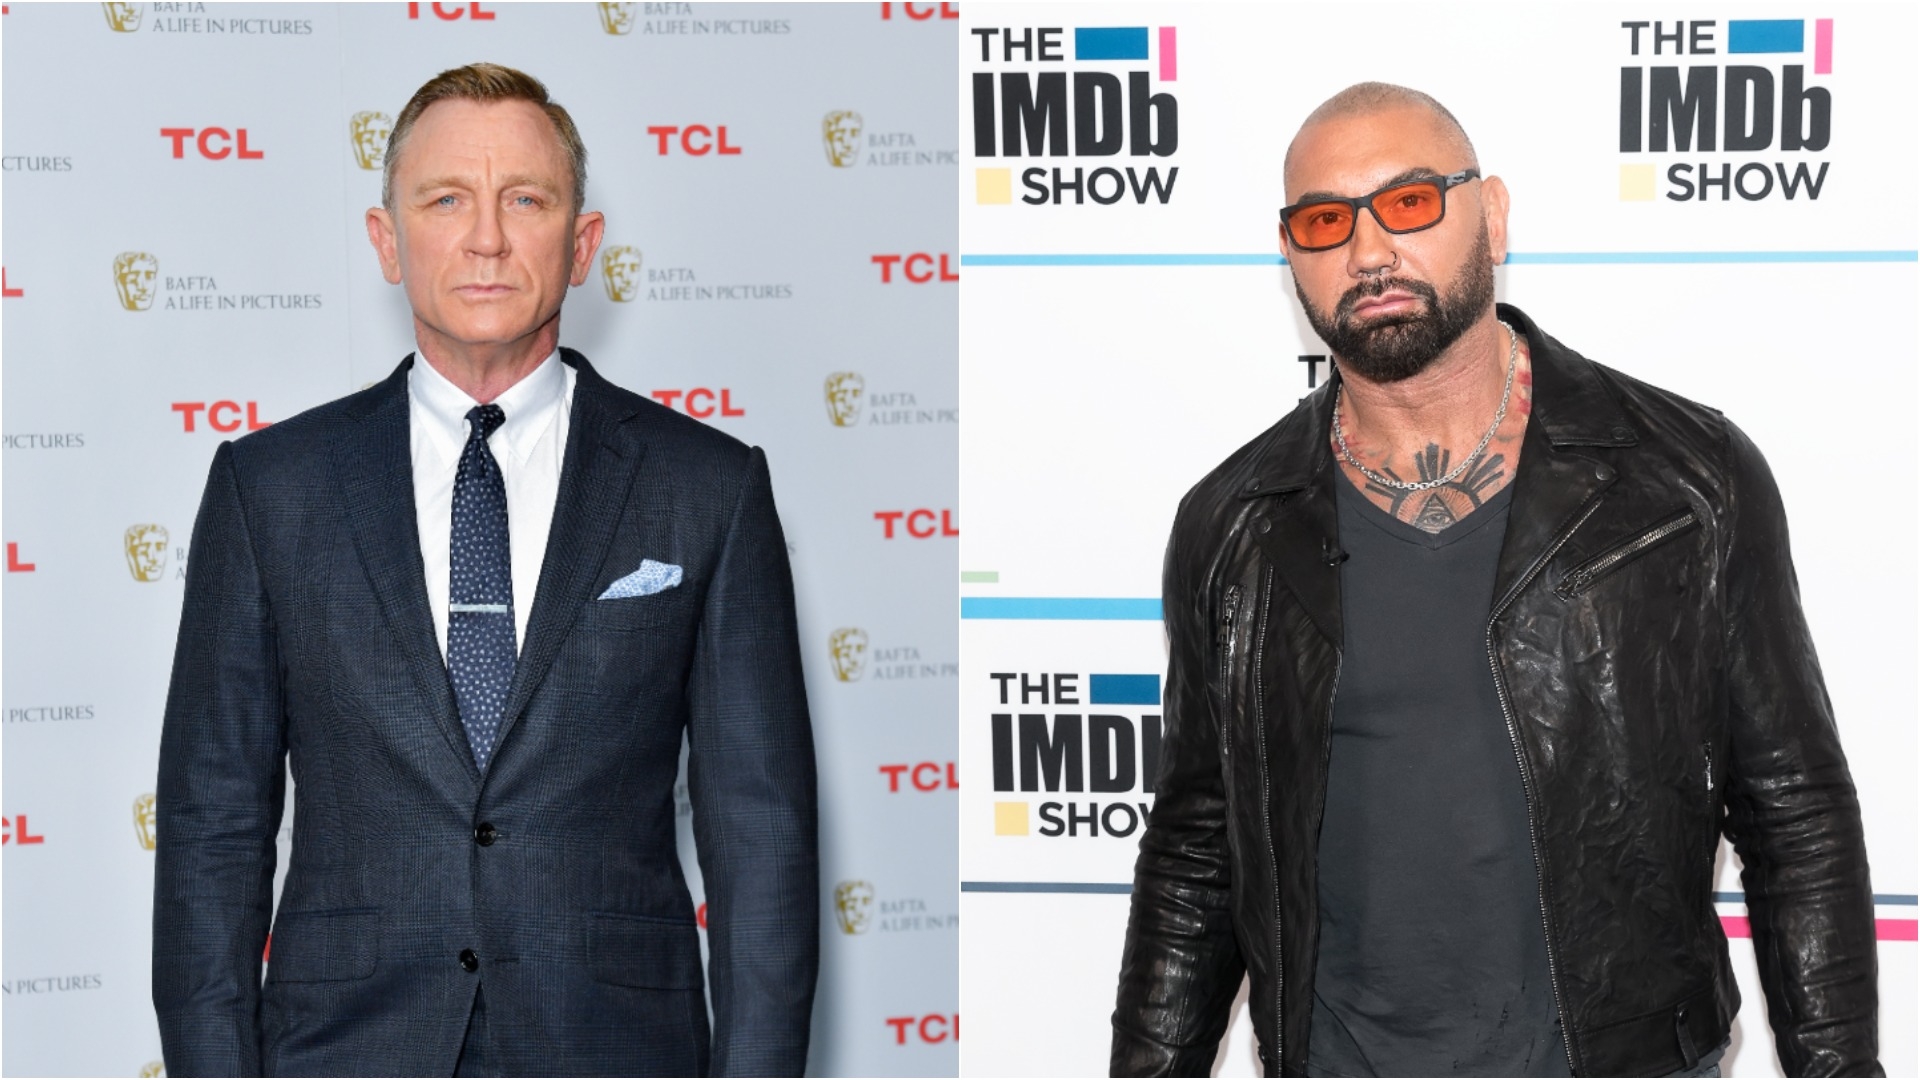 Daniel Craig ran away after breaking Dave Bautista’s nose on the set of Spectre